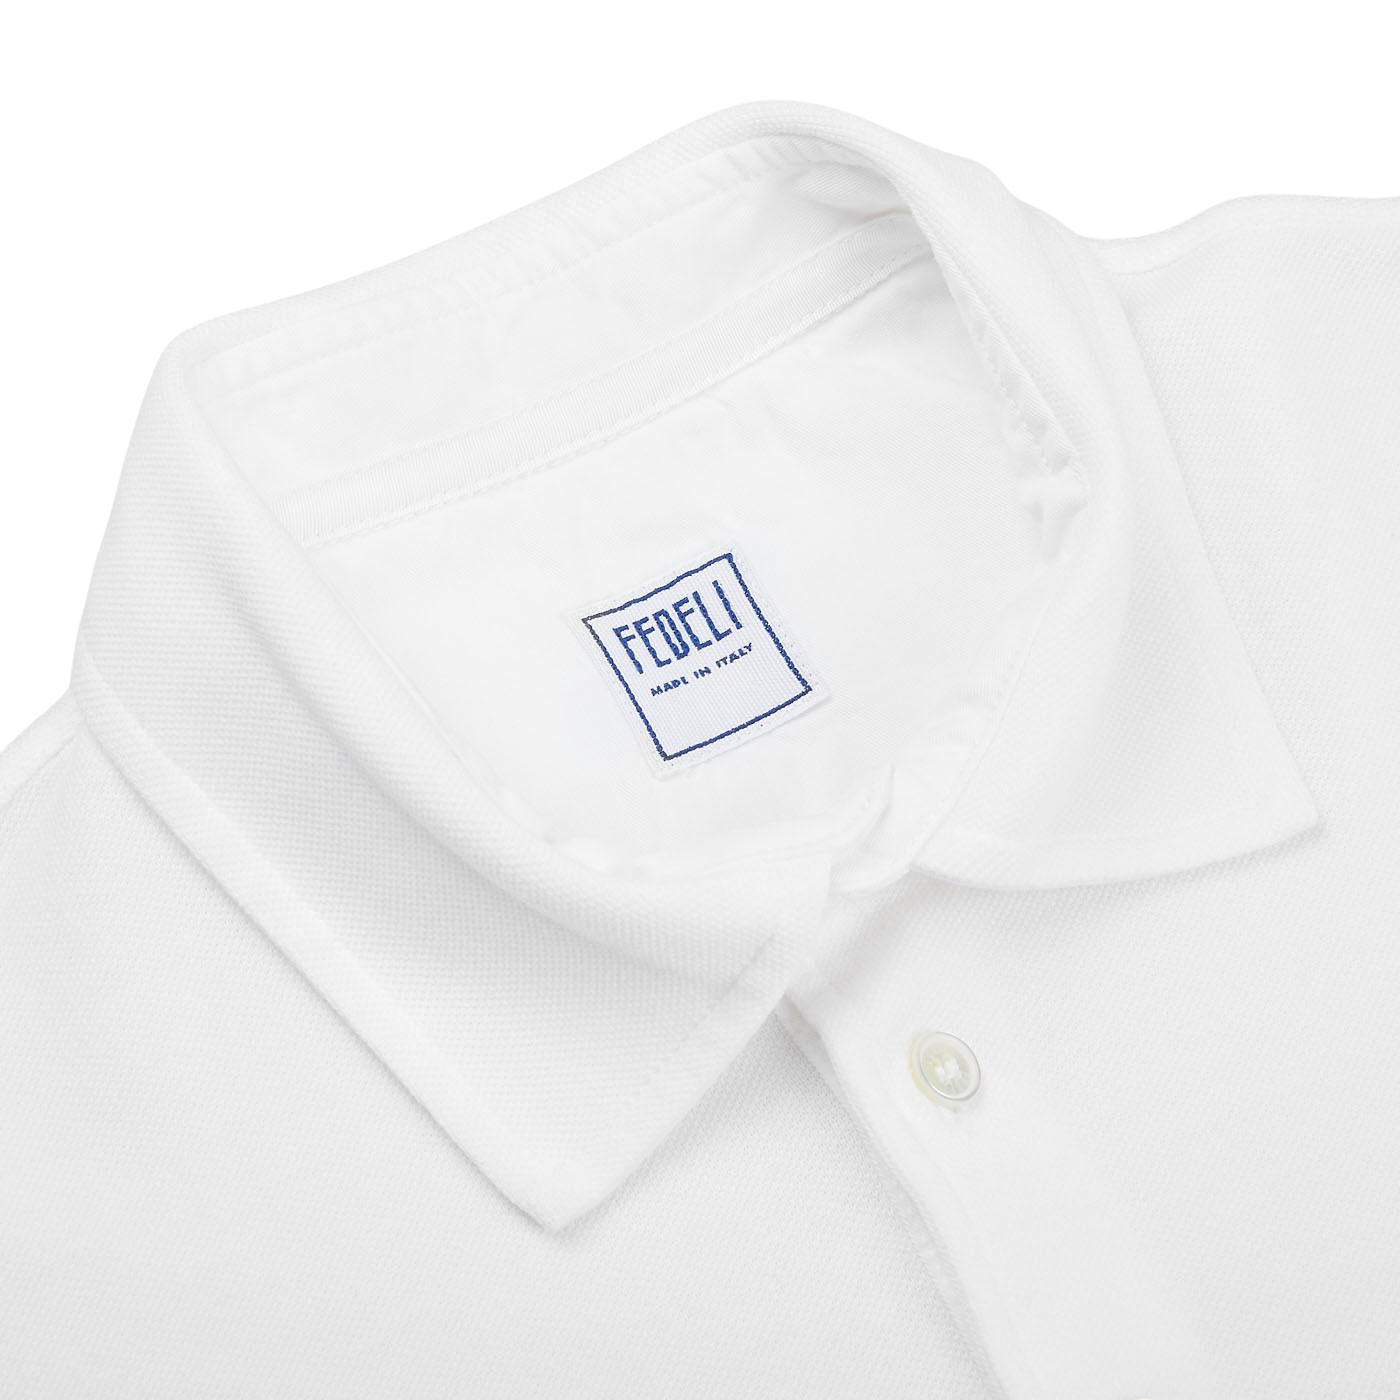 A Fedeli washed white cotton pique polo shirt for the summer wardrobe.